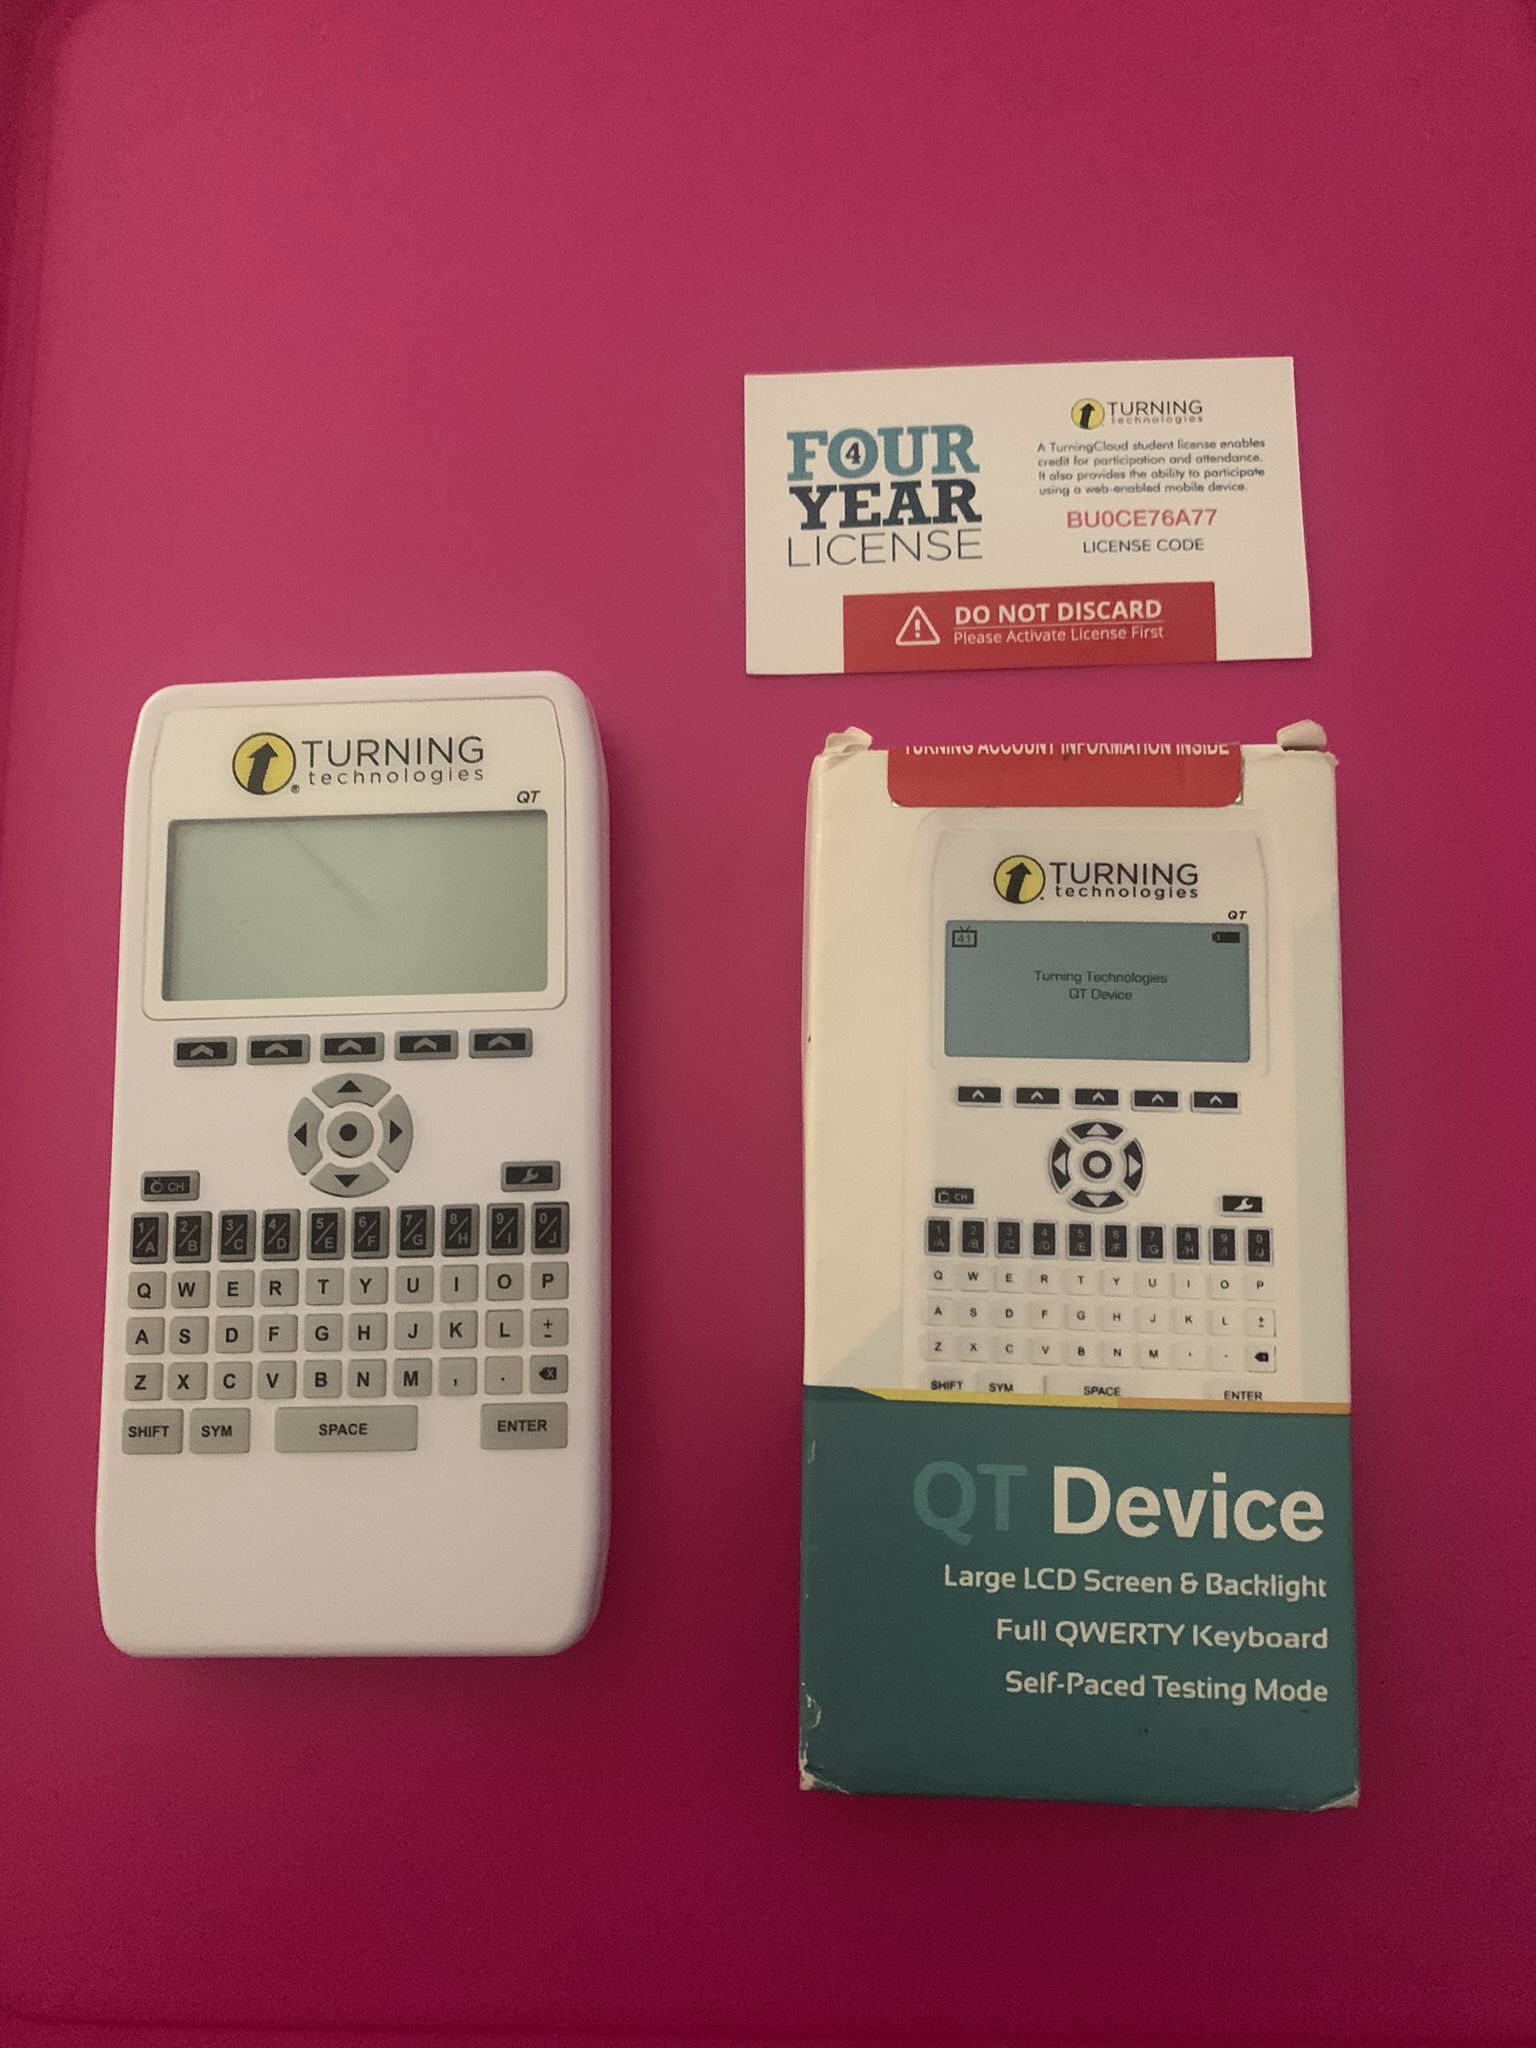 Turning Technologies QT Device (remote clicker for exams, quizzes, lectures, Etc.)